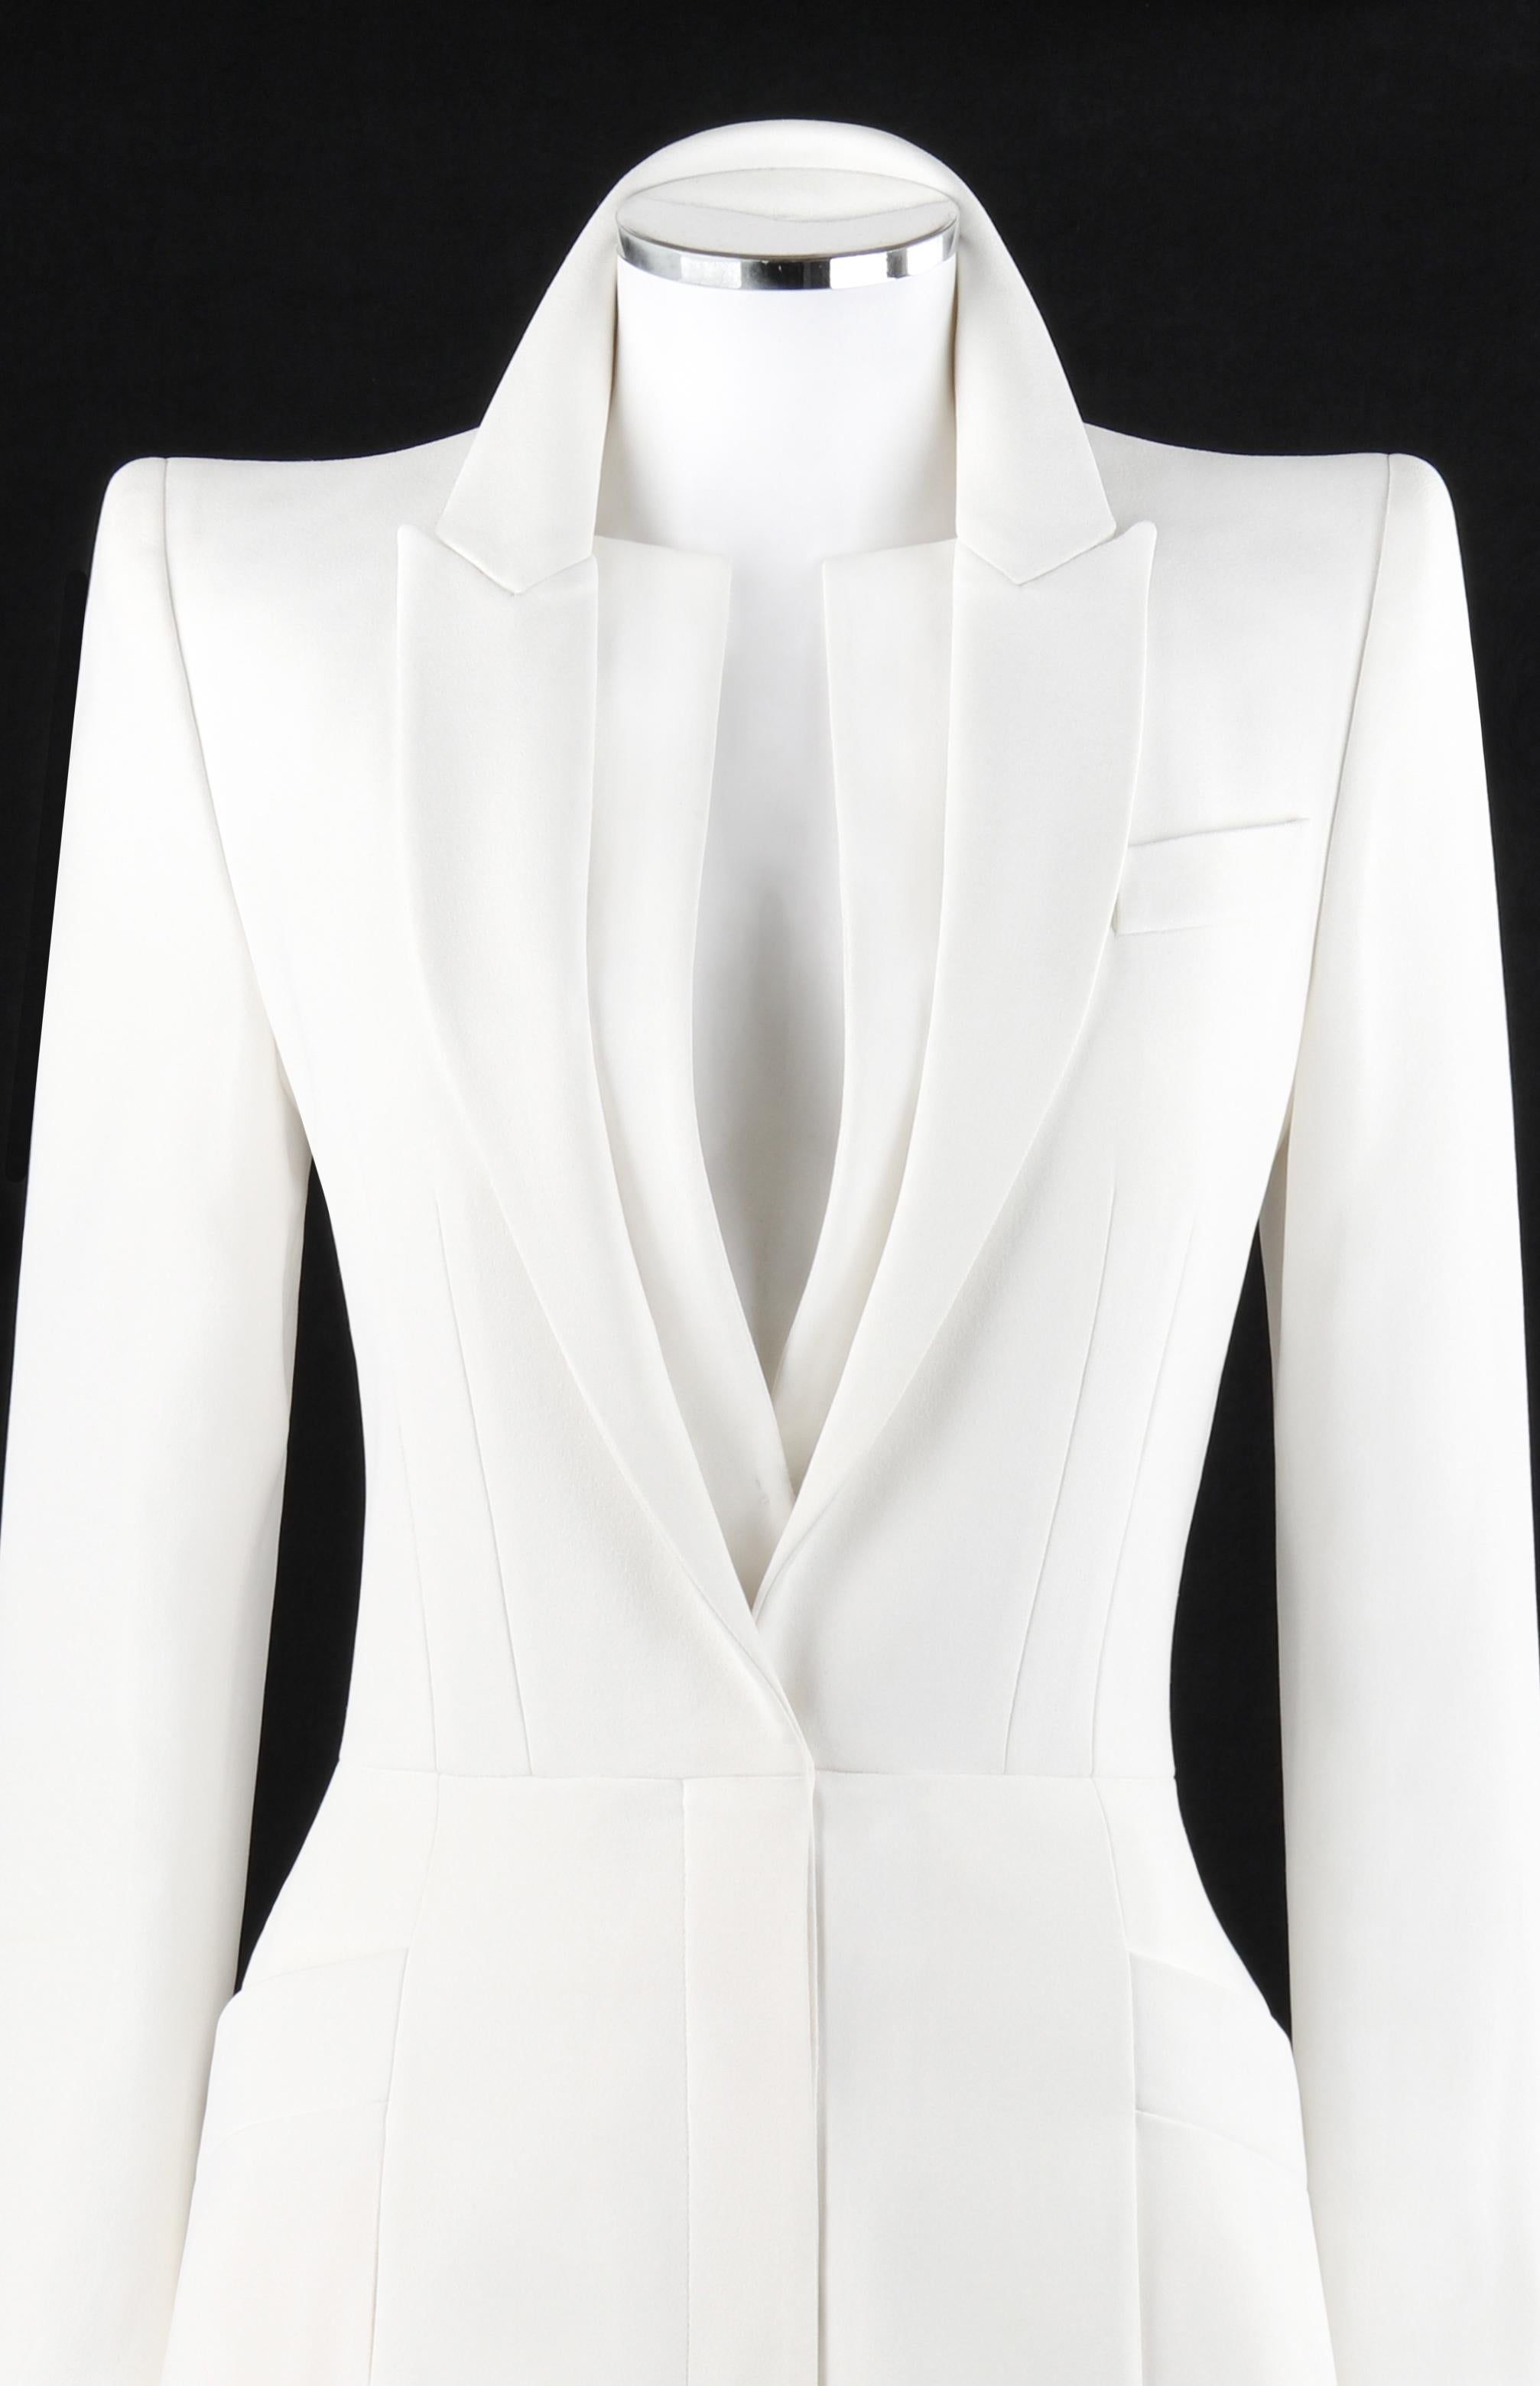 ALEXANDER McQUEEN S/S 2015 White Tailored Classic Structure Longline Coat Dress

Brand / Manufacturer: Alexander McQueen
Collection: S/S 2015
Designer: Sarah Burton
Style: Long sleeve a-line blazer jacket dress
Color(s): White
Lined: Yes
Marked